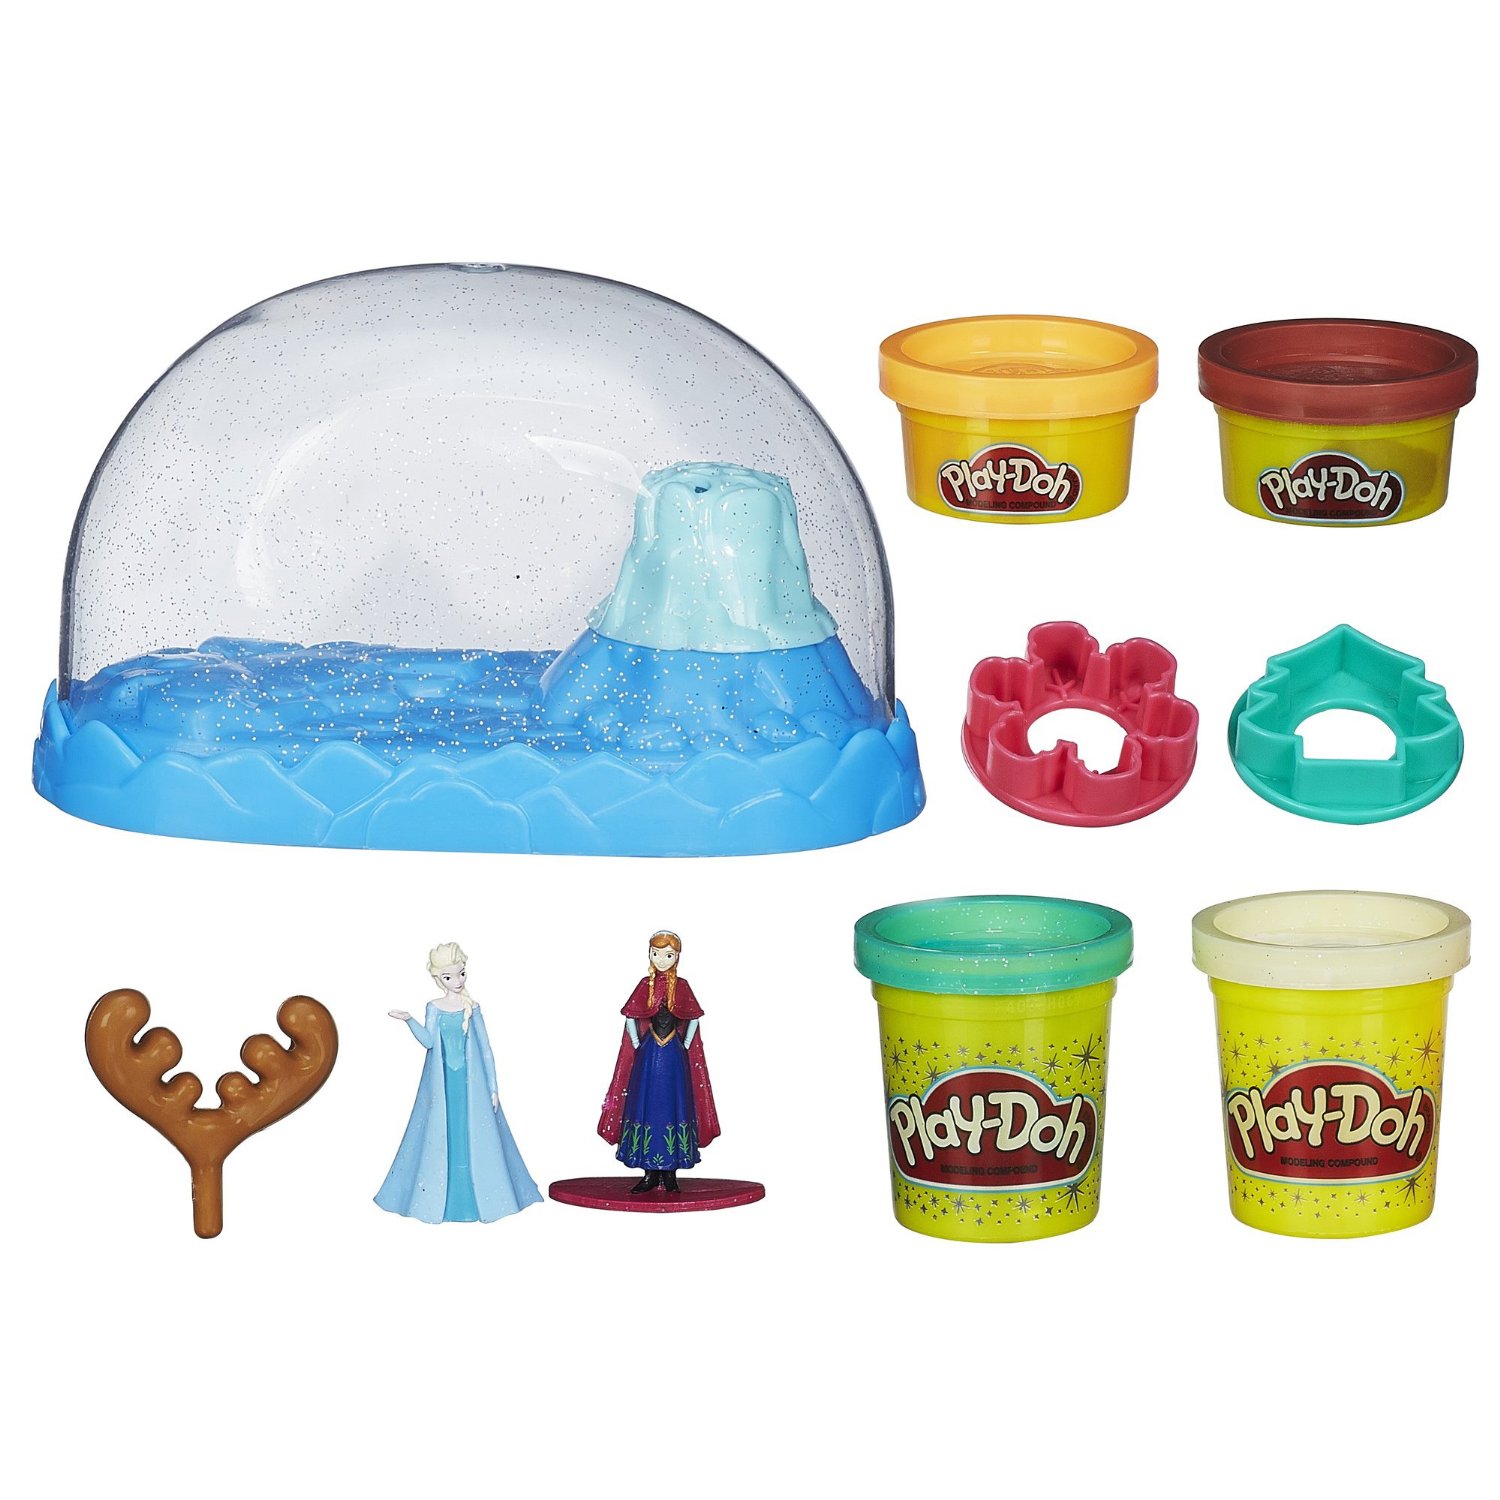 Play-Doh Disney Frozen Sparkle Snow Dome Set with Elsa and Anna